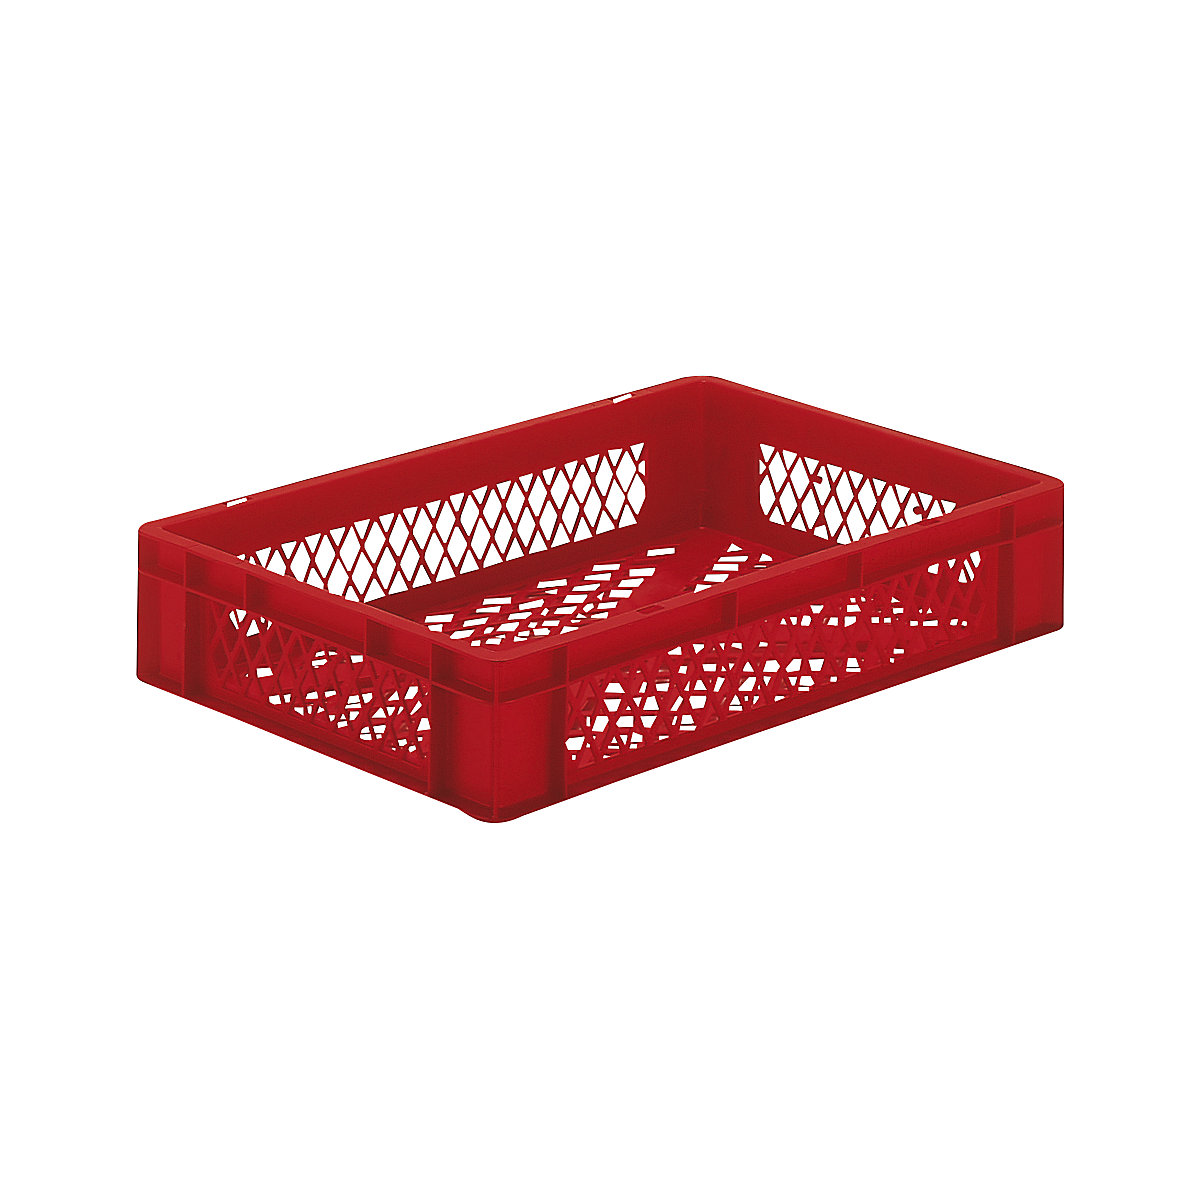 Euro stacking container, perforated walls and base, LxWxH 600 x 400 x 120 mm, red, pack of 5-8